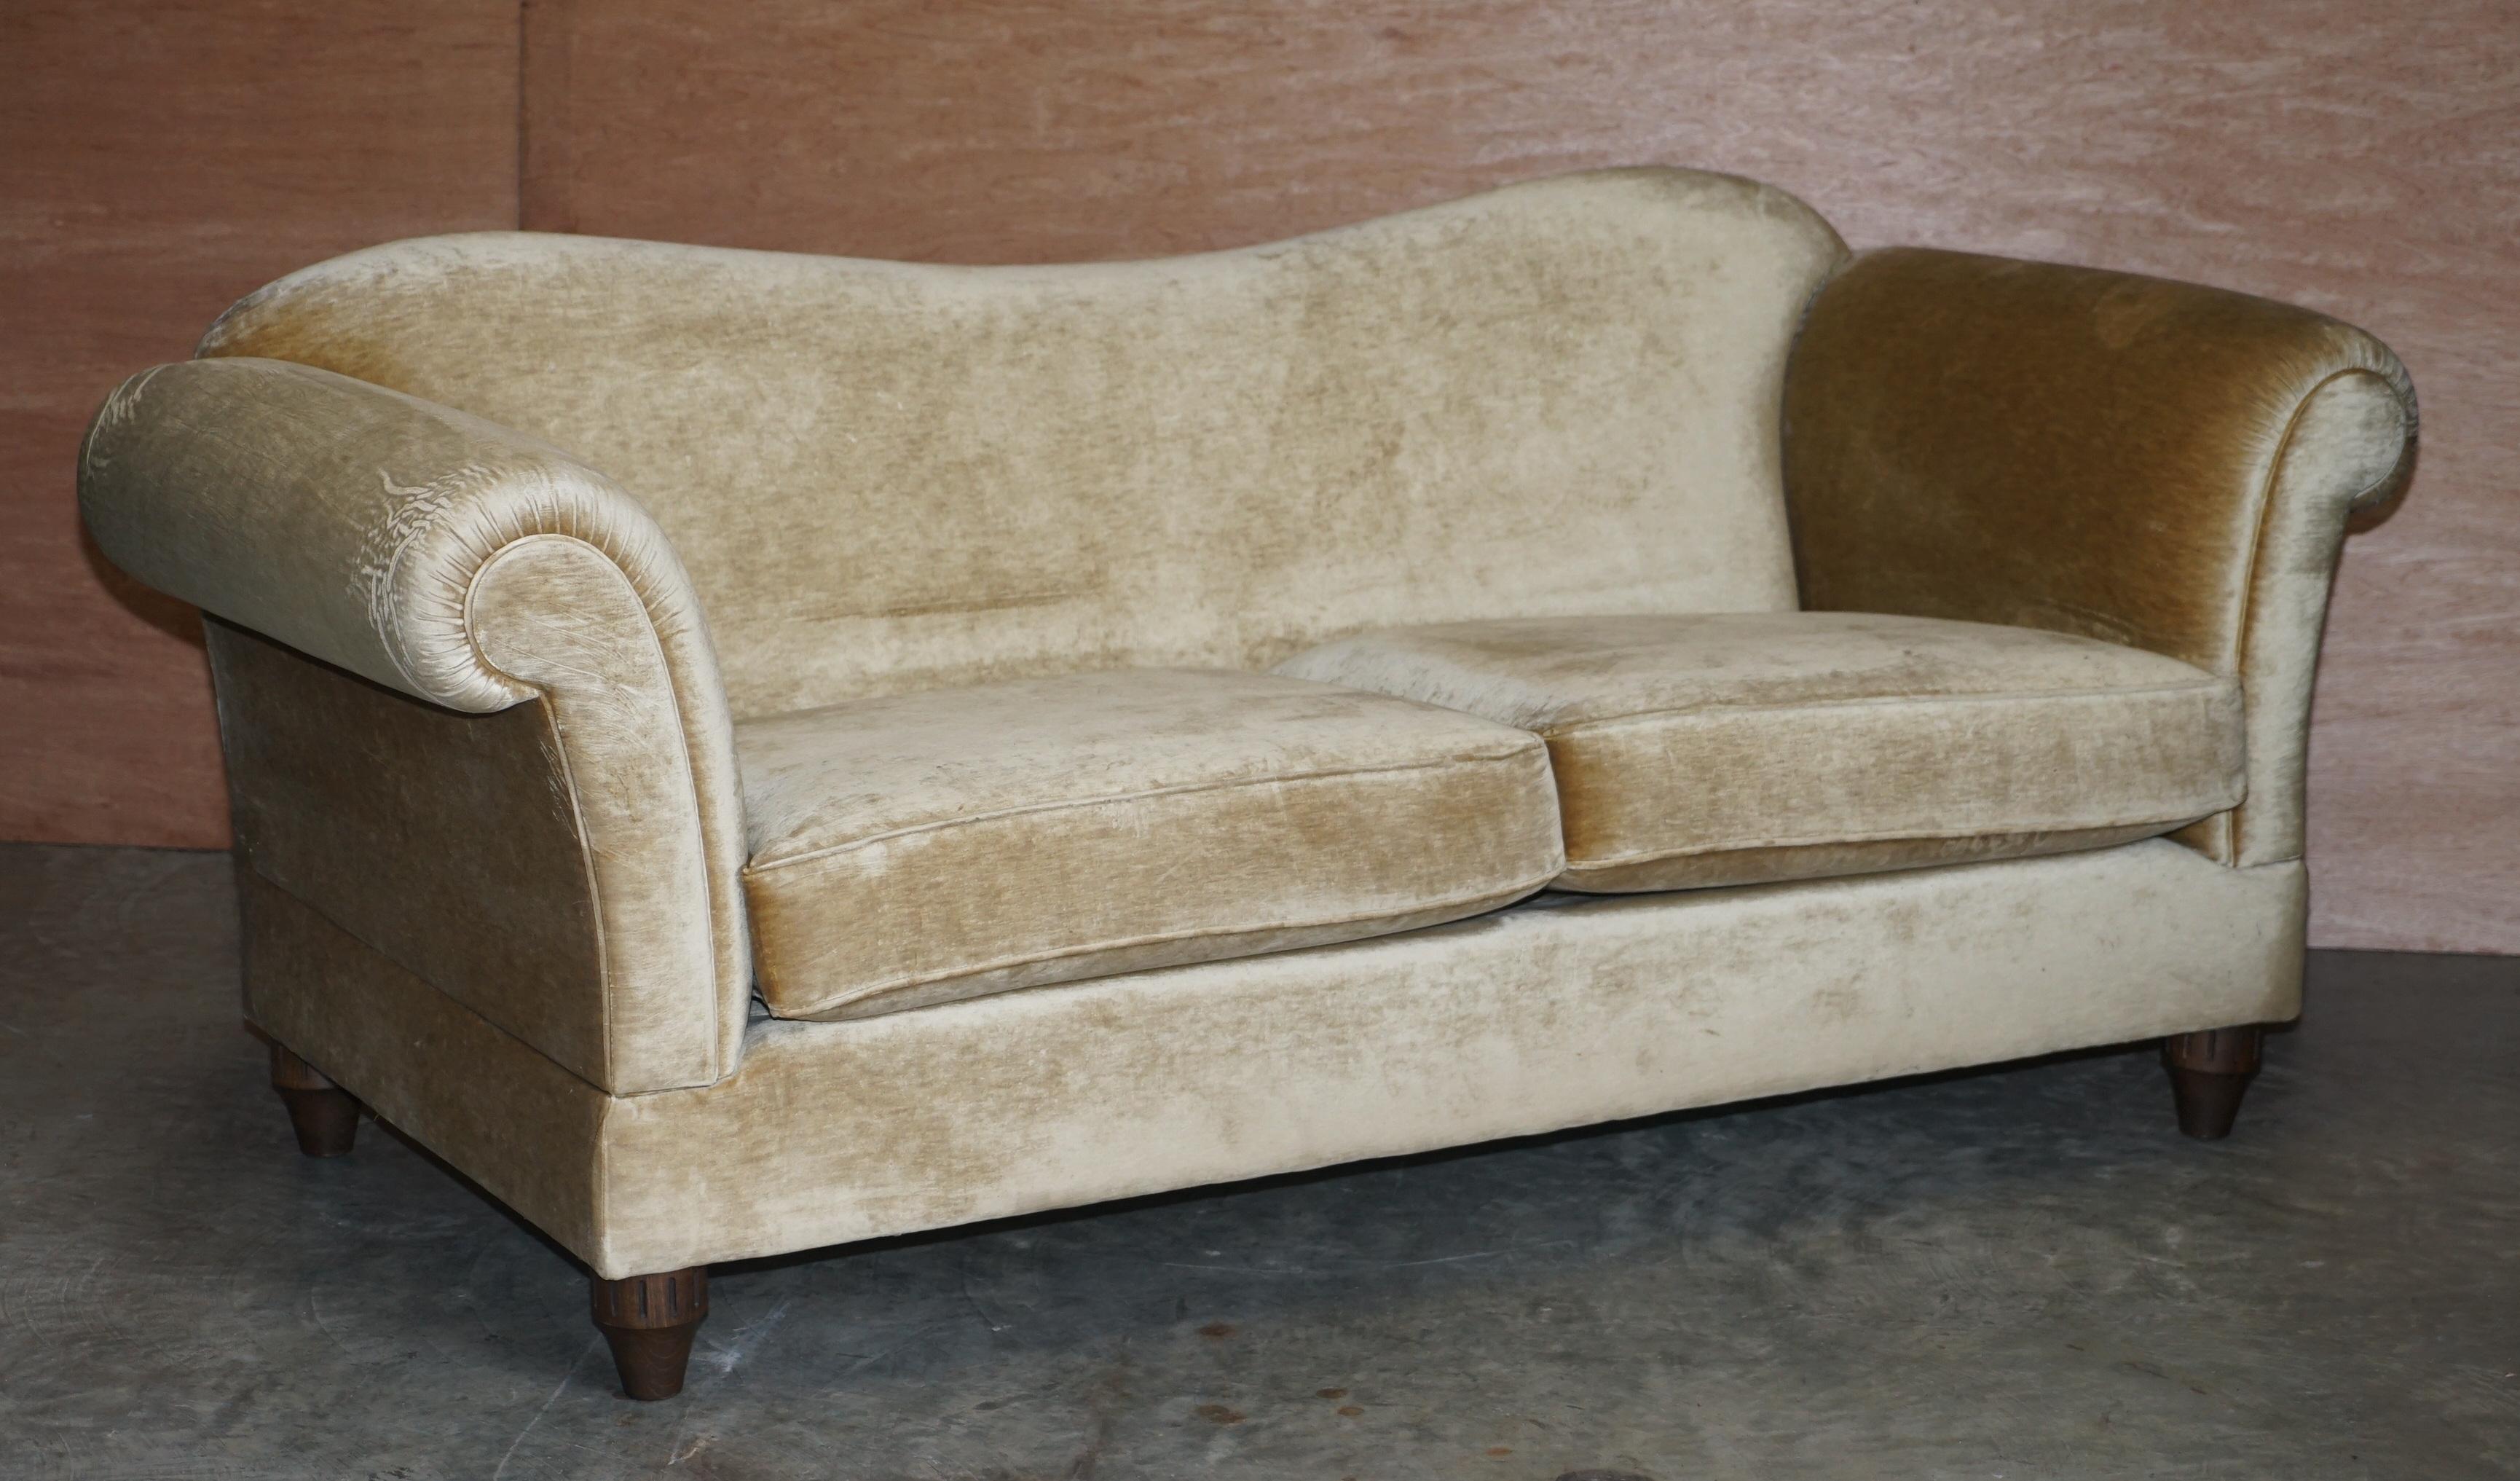 We are delighted to offer for sale this lovely John Sankey velour upholstered contemporary sofa and matching ottoman

A very good looking expensive and well made pair, the upholstery is very fine velour velvet, it is like silk to touch but has the